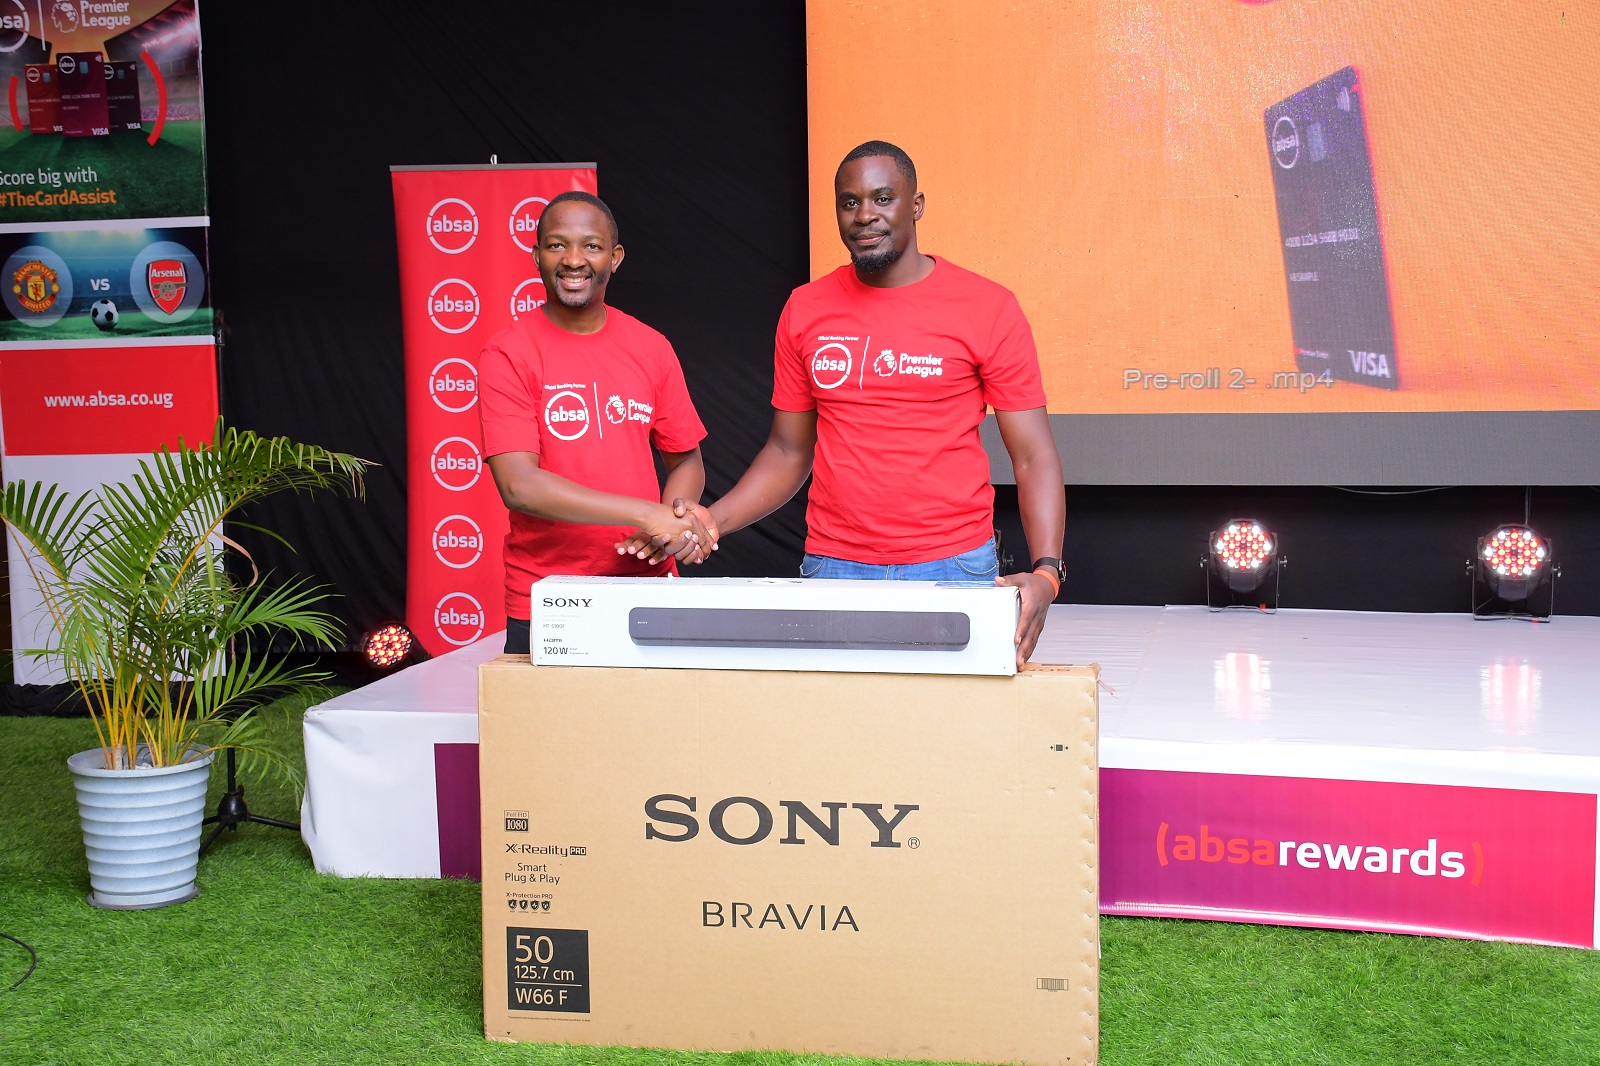 Absa treats Card Assist winner, others to EPL VIP viewing experience